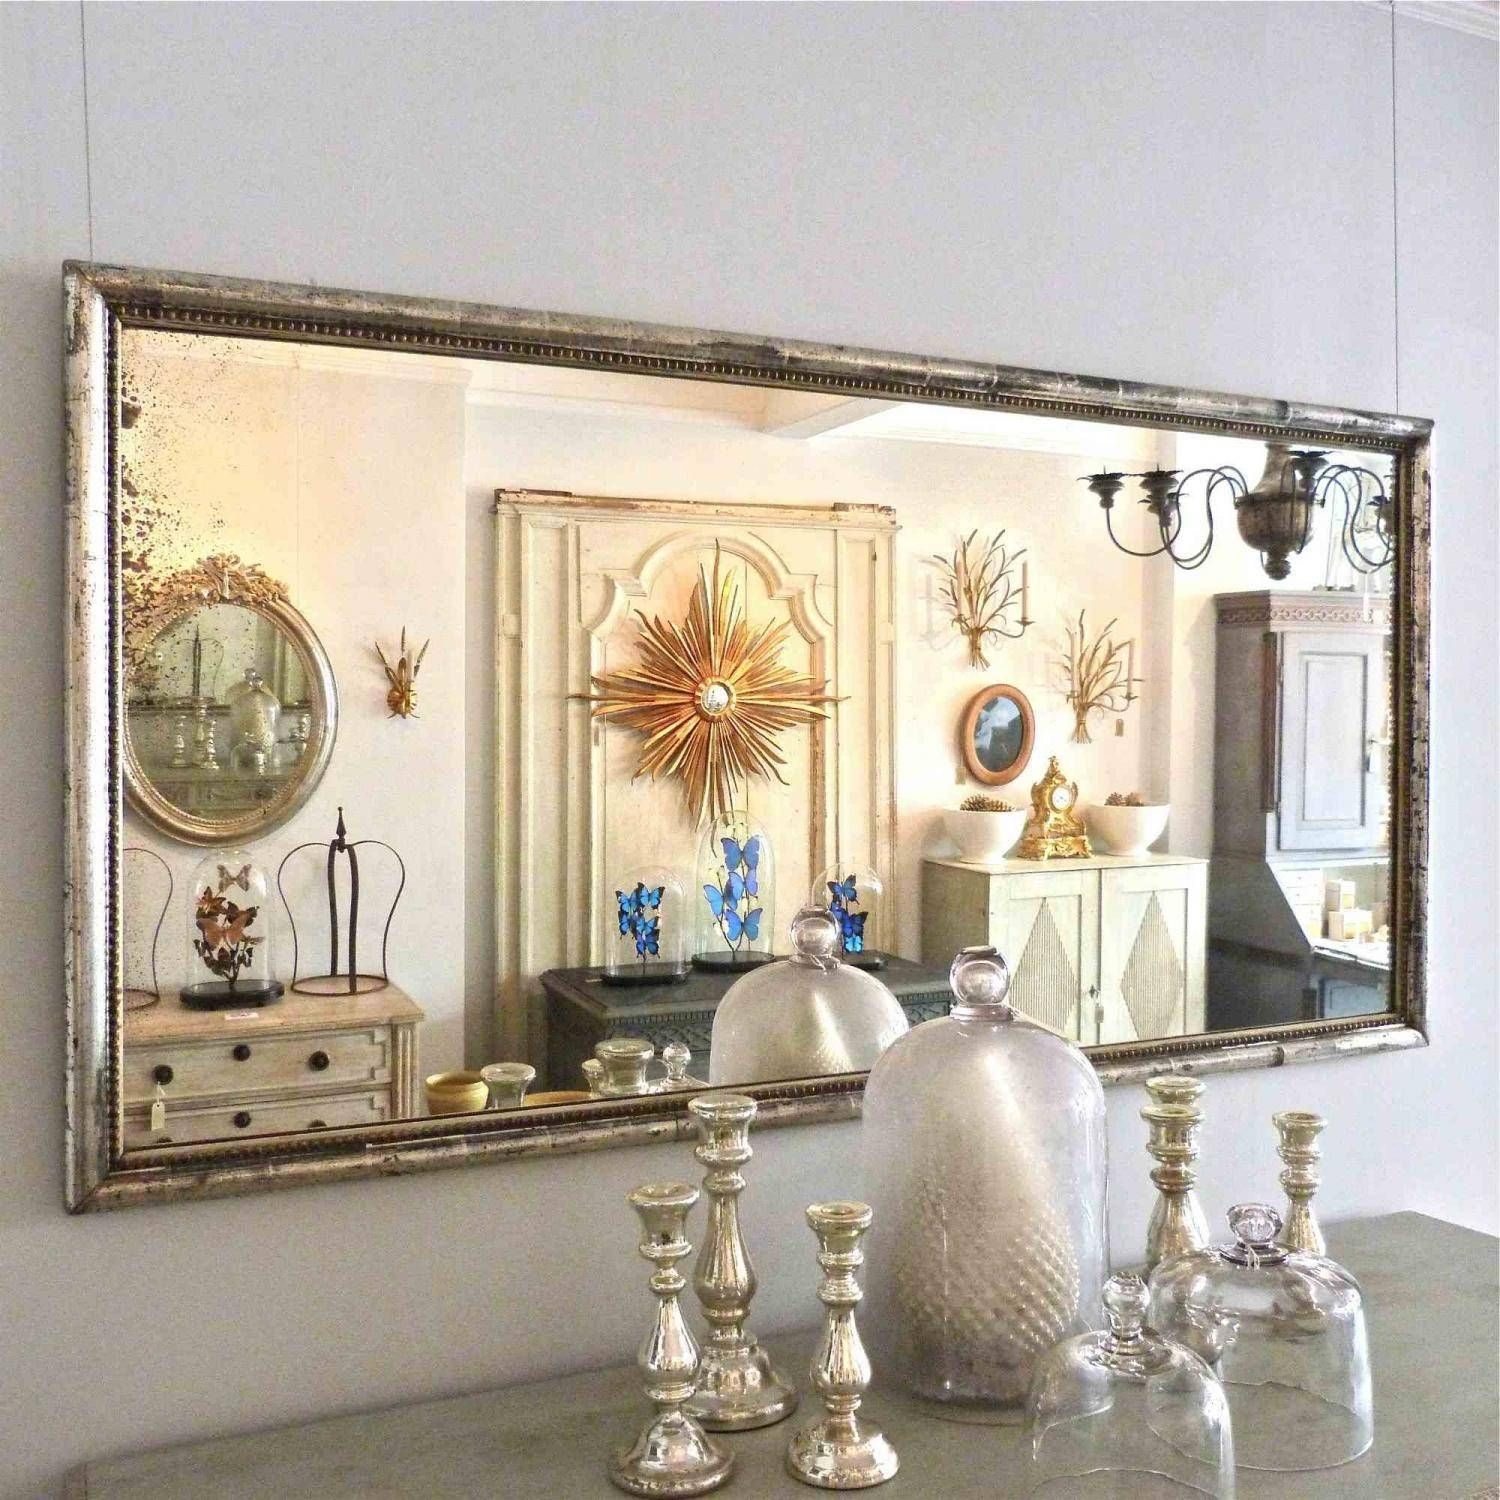 Rare French Silver Bistro Mirror With Beaded Trim In Mirrors Throughout Silver French Mirrors (View 11 of 25)